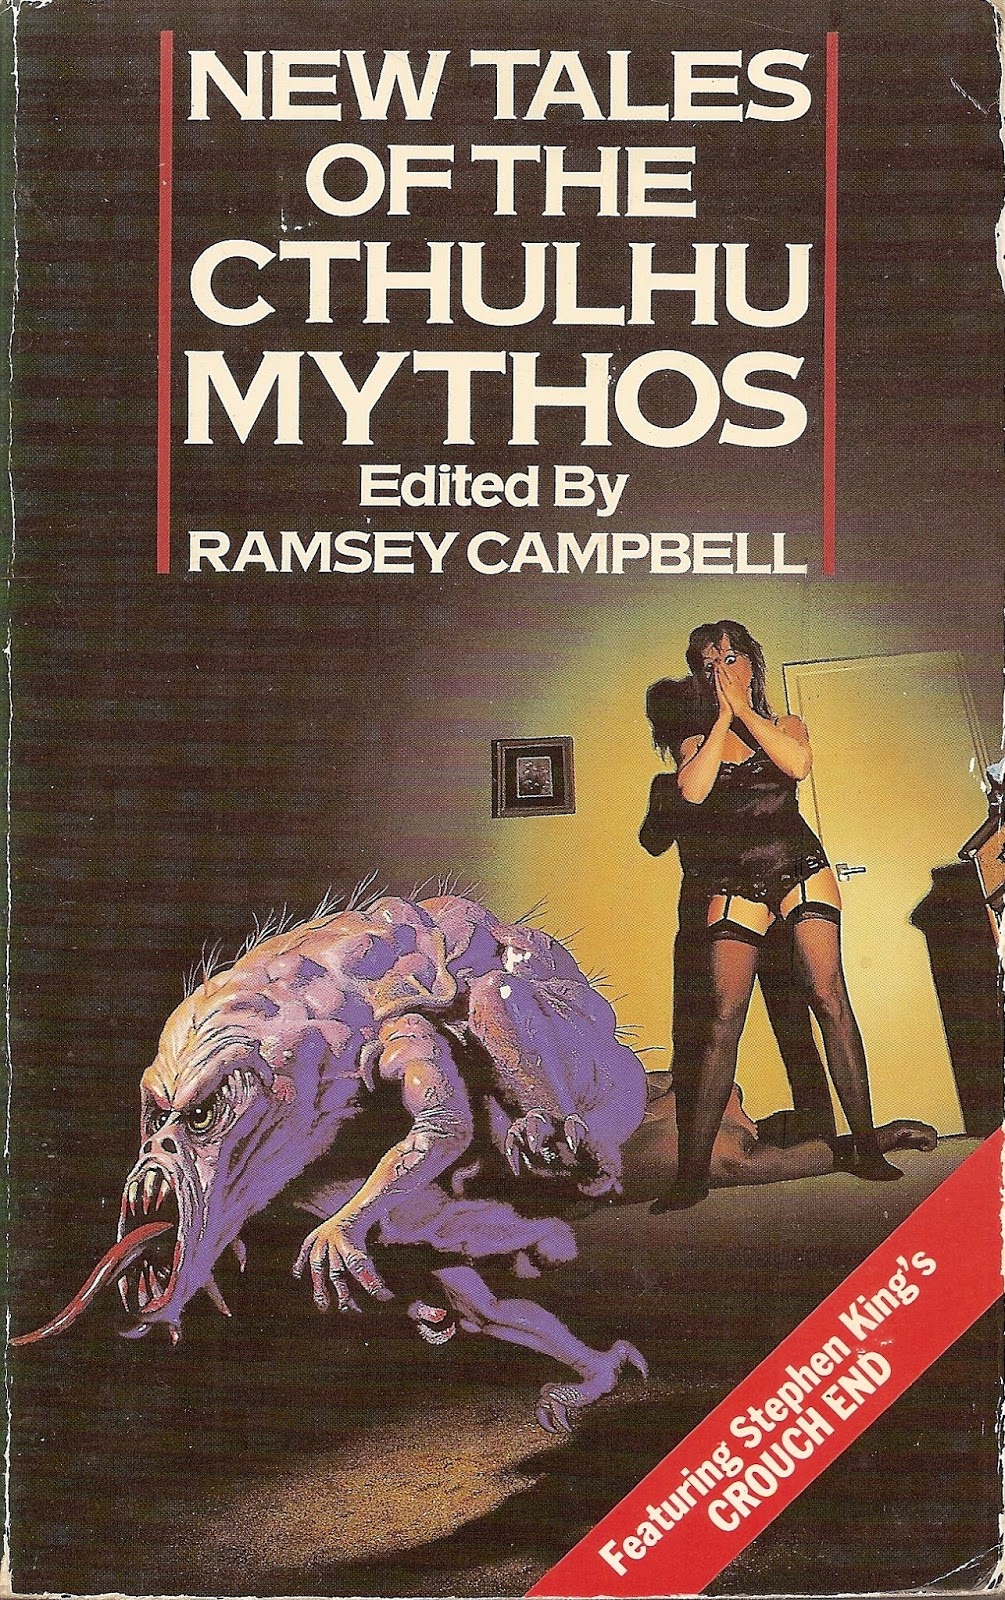 New Tales of the Cthulhu Mythos - ed. Ramsey Campbell Audiobook Online ...